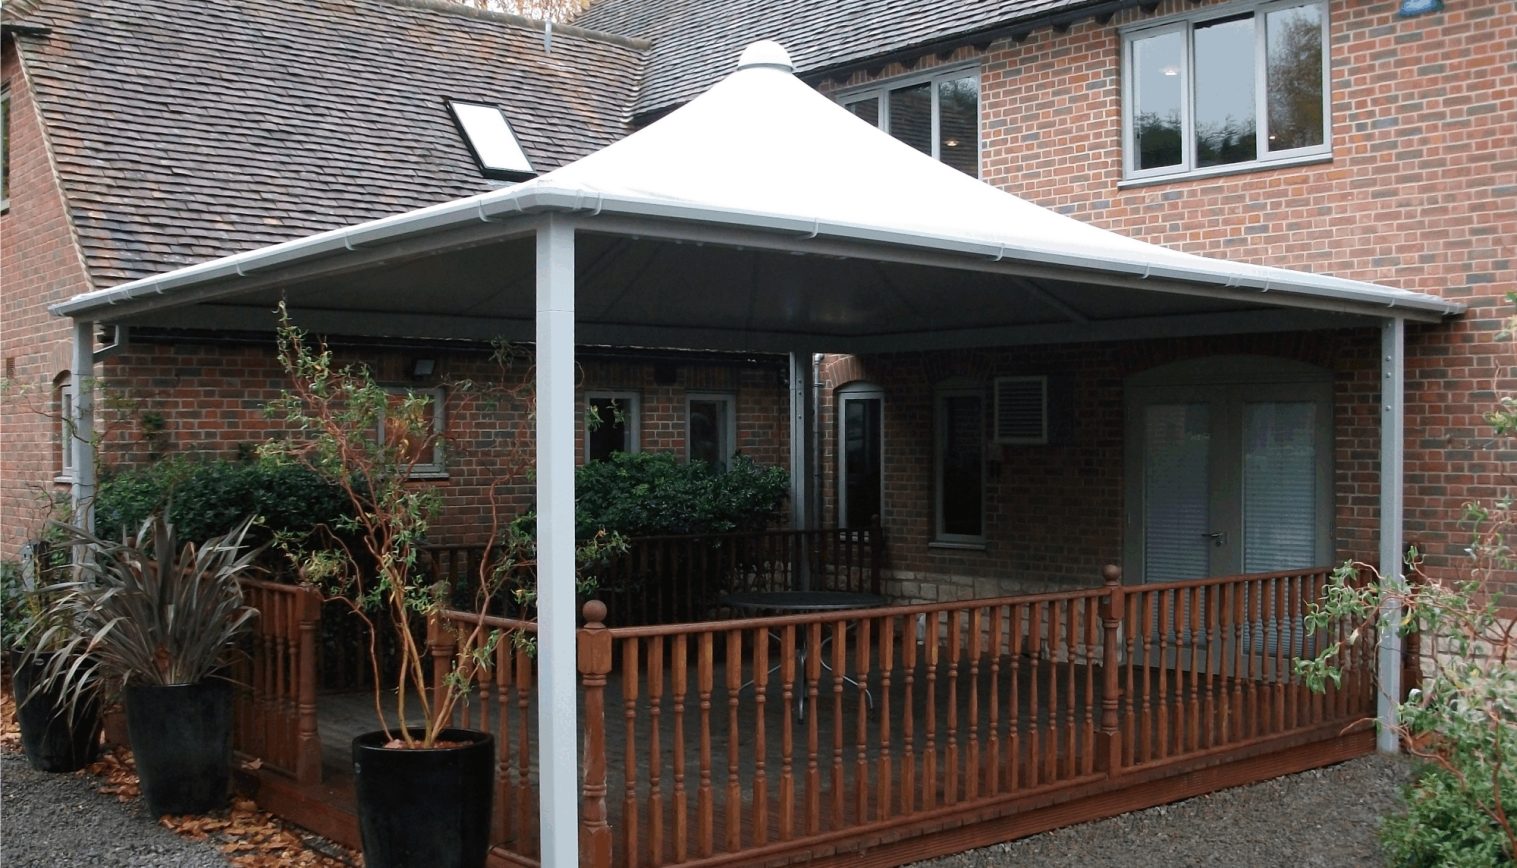 Weber-Stephen Products (UK) Ltd – Free Standing Tensile Fabric Canopy